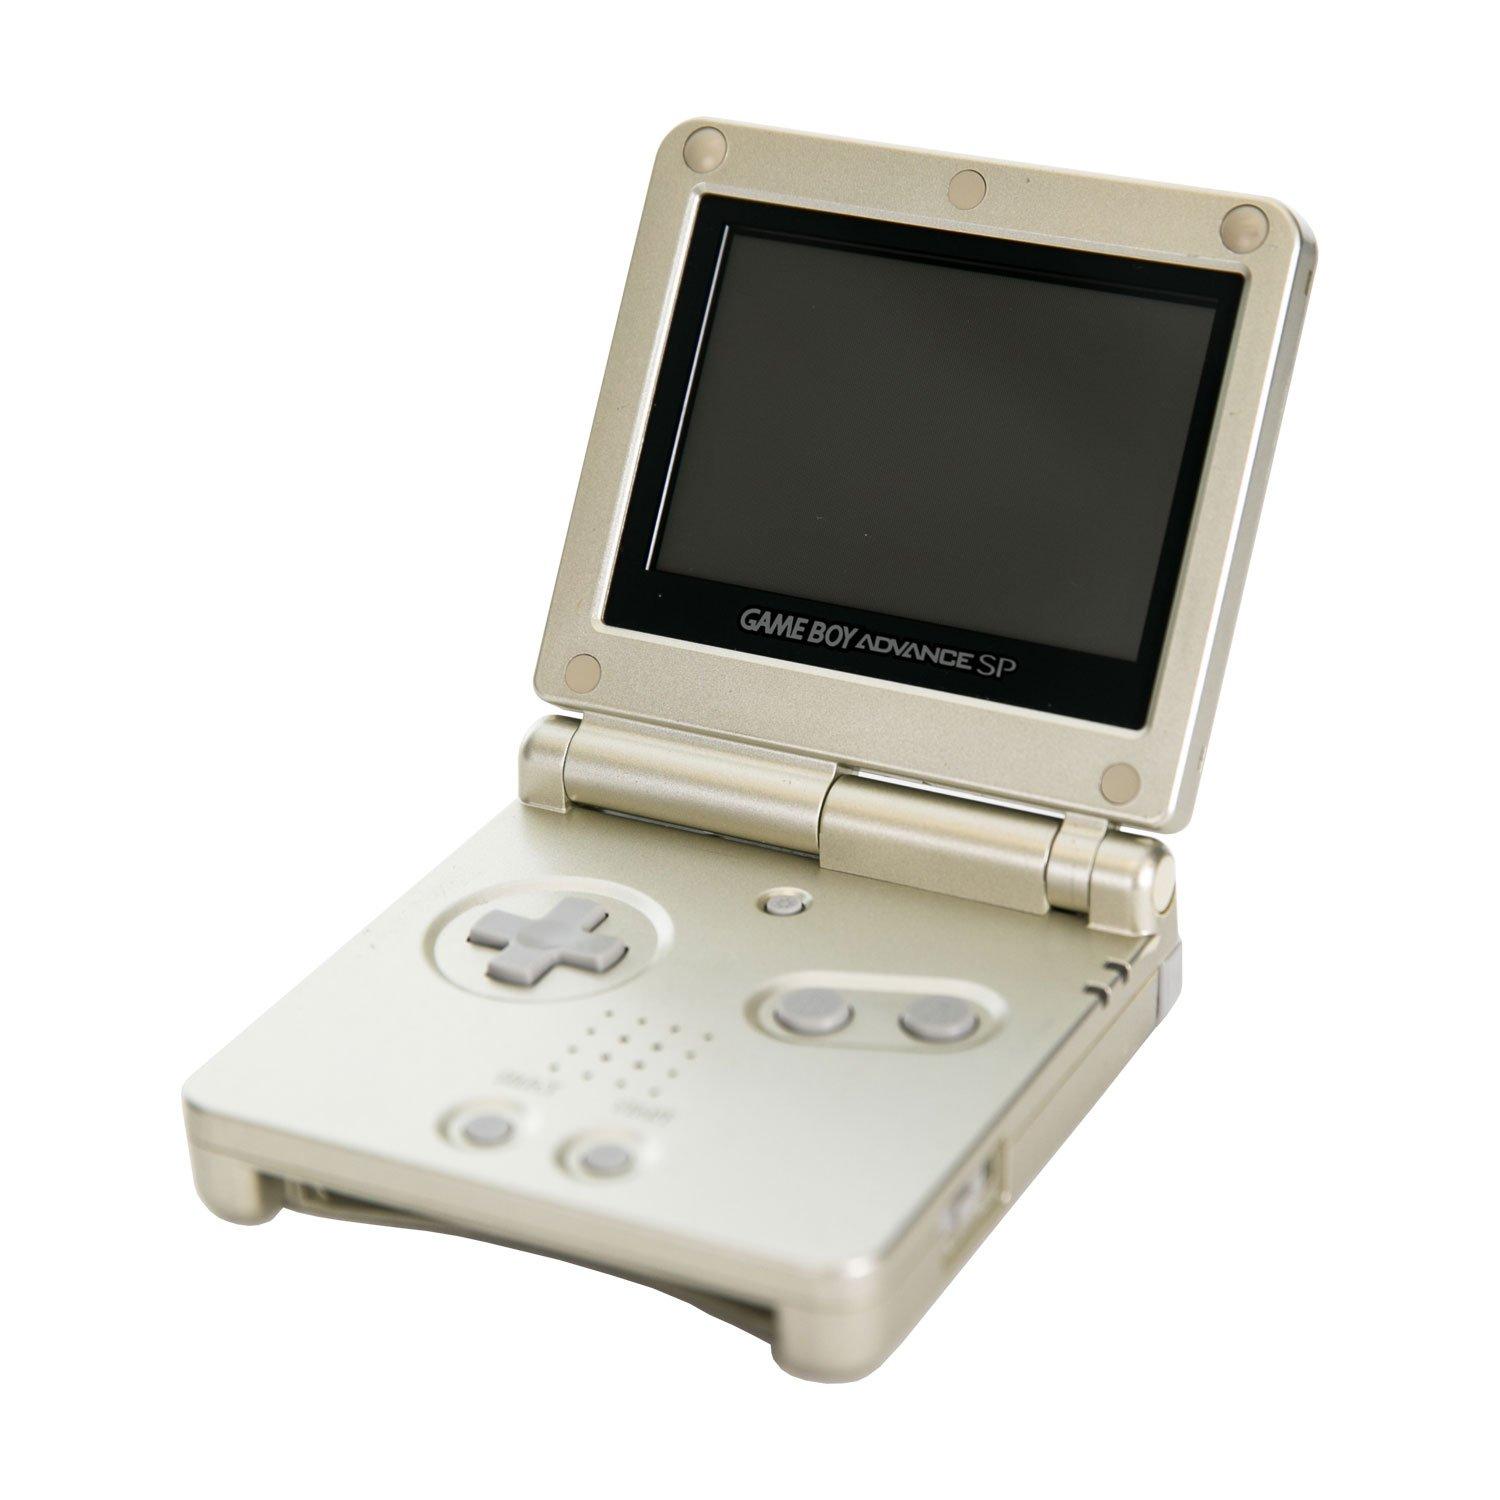 gameboy advance sp stores